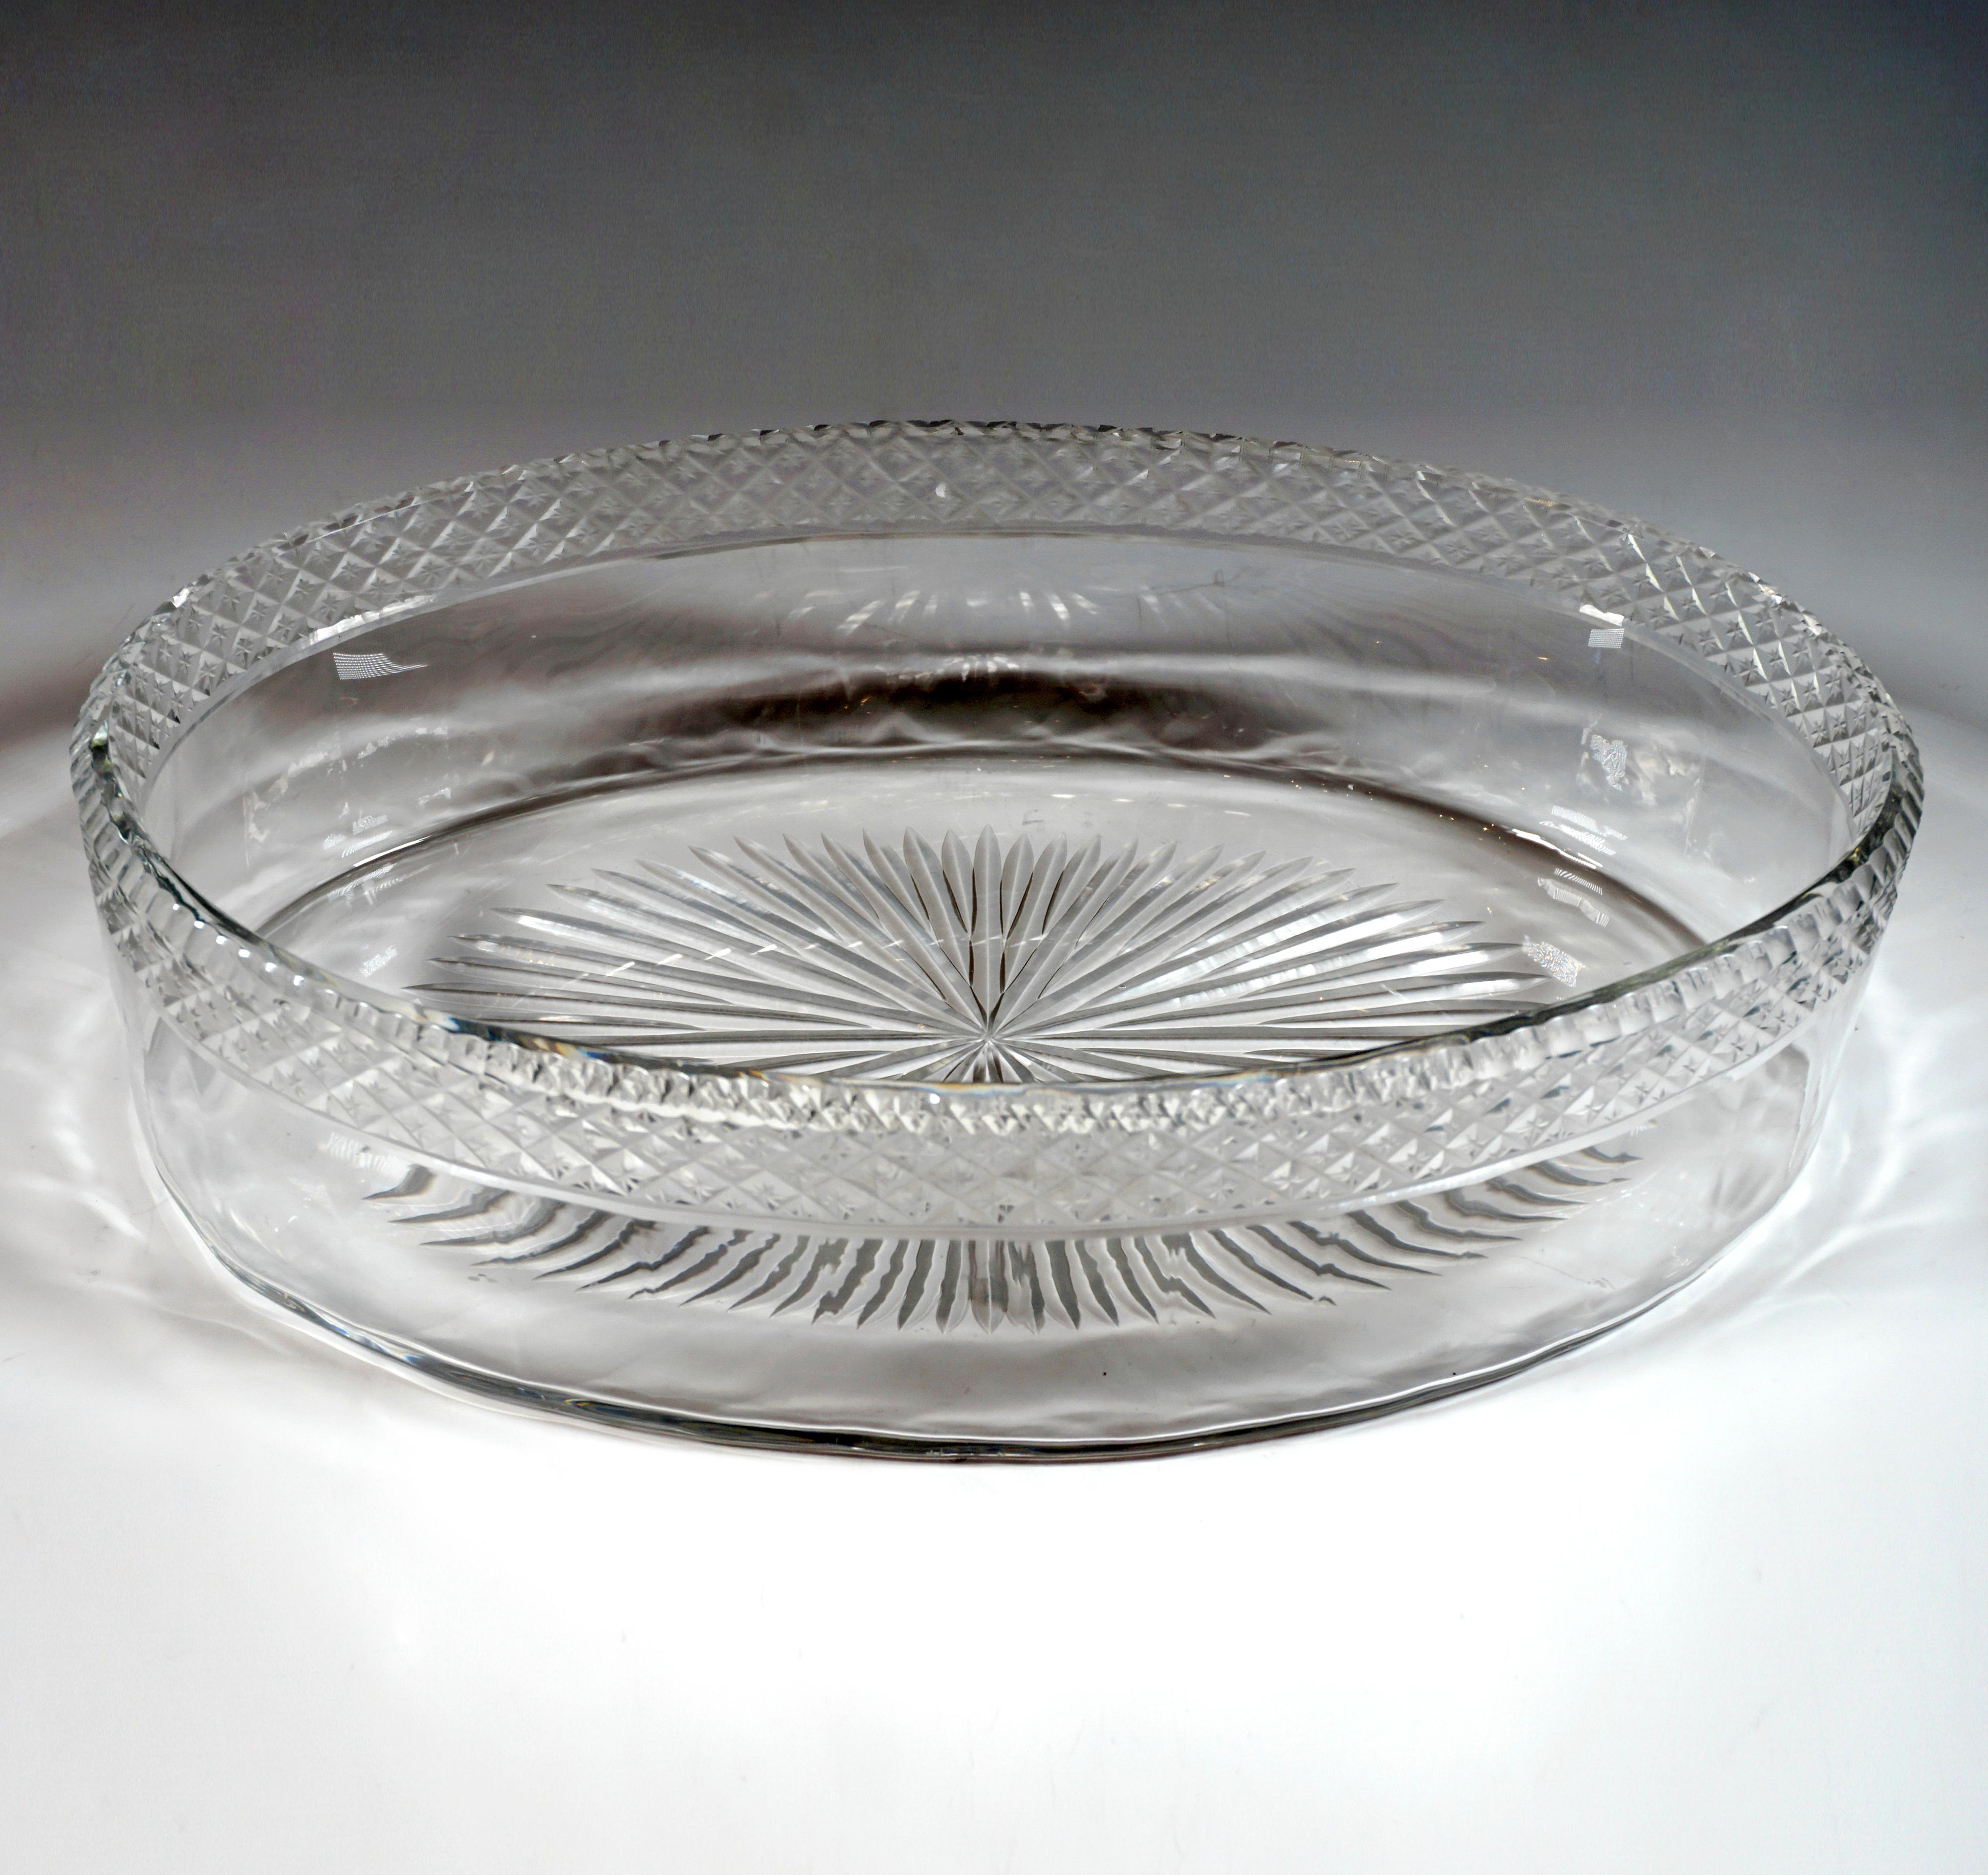 Early 20th Century Art Nouveau Silver Jardinière With Cut Glass Liner, Wilhelm Binder Germany c1900 For Sale